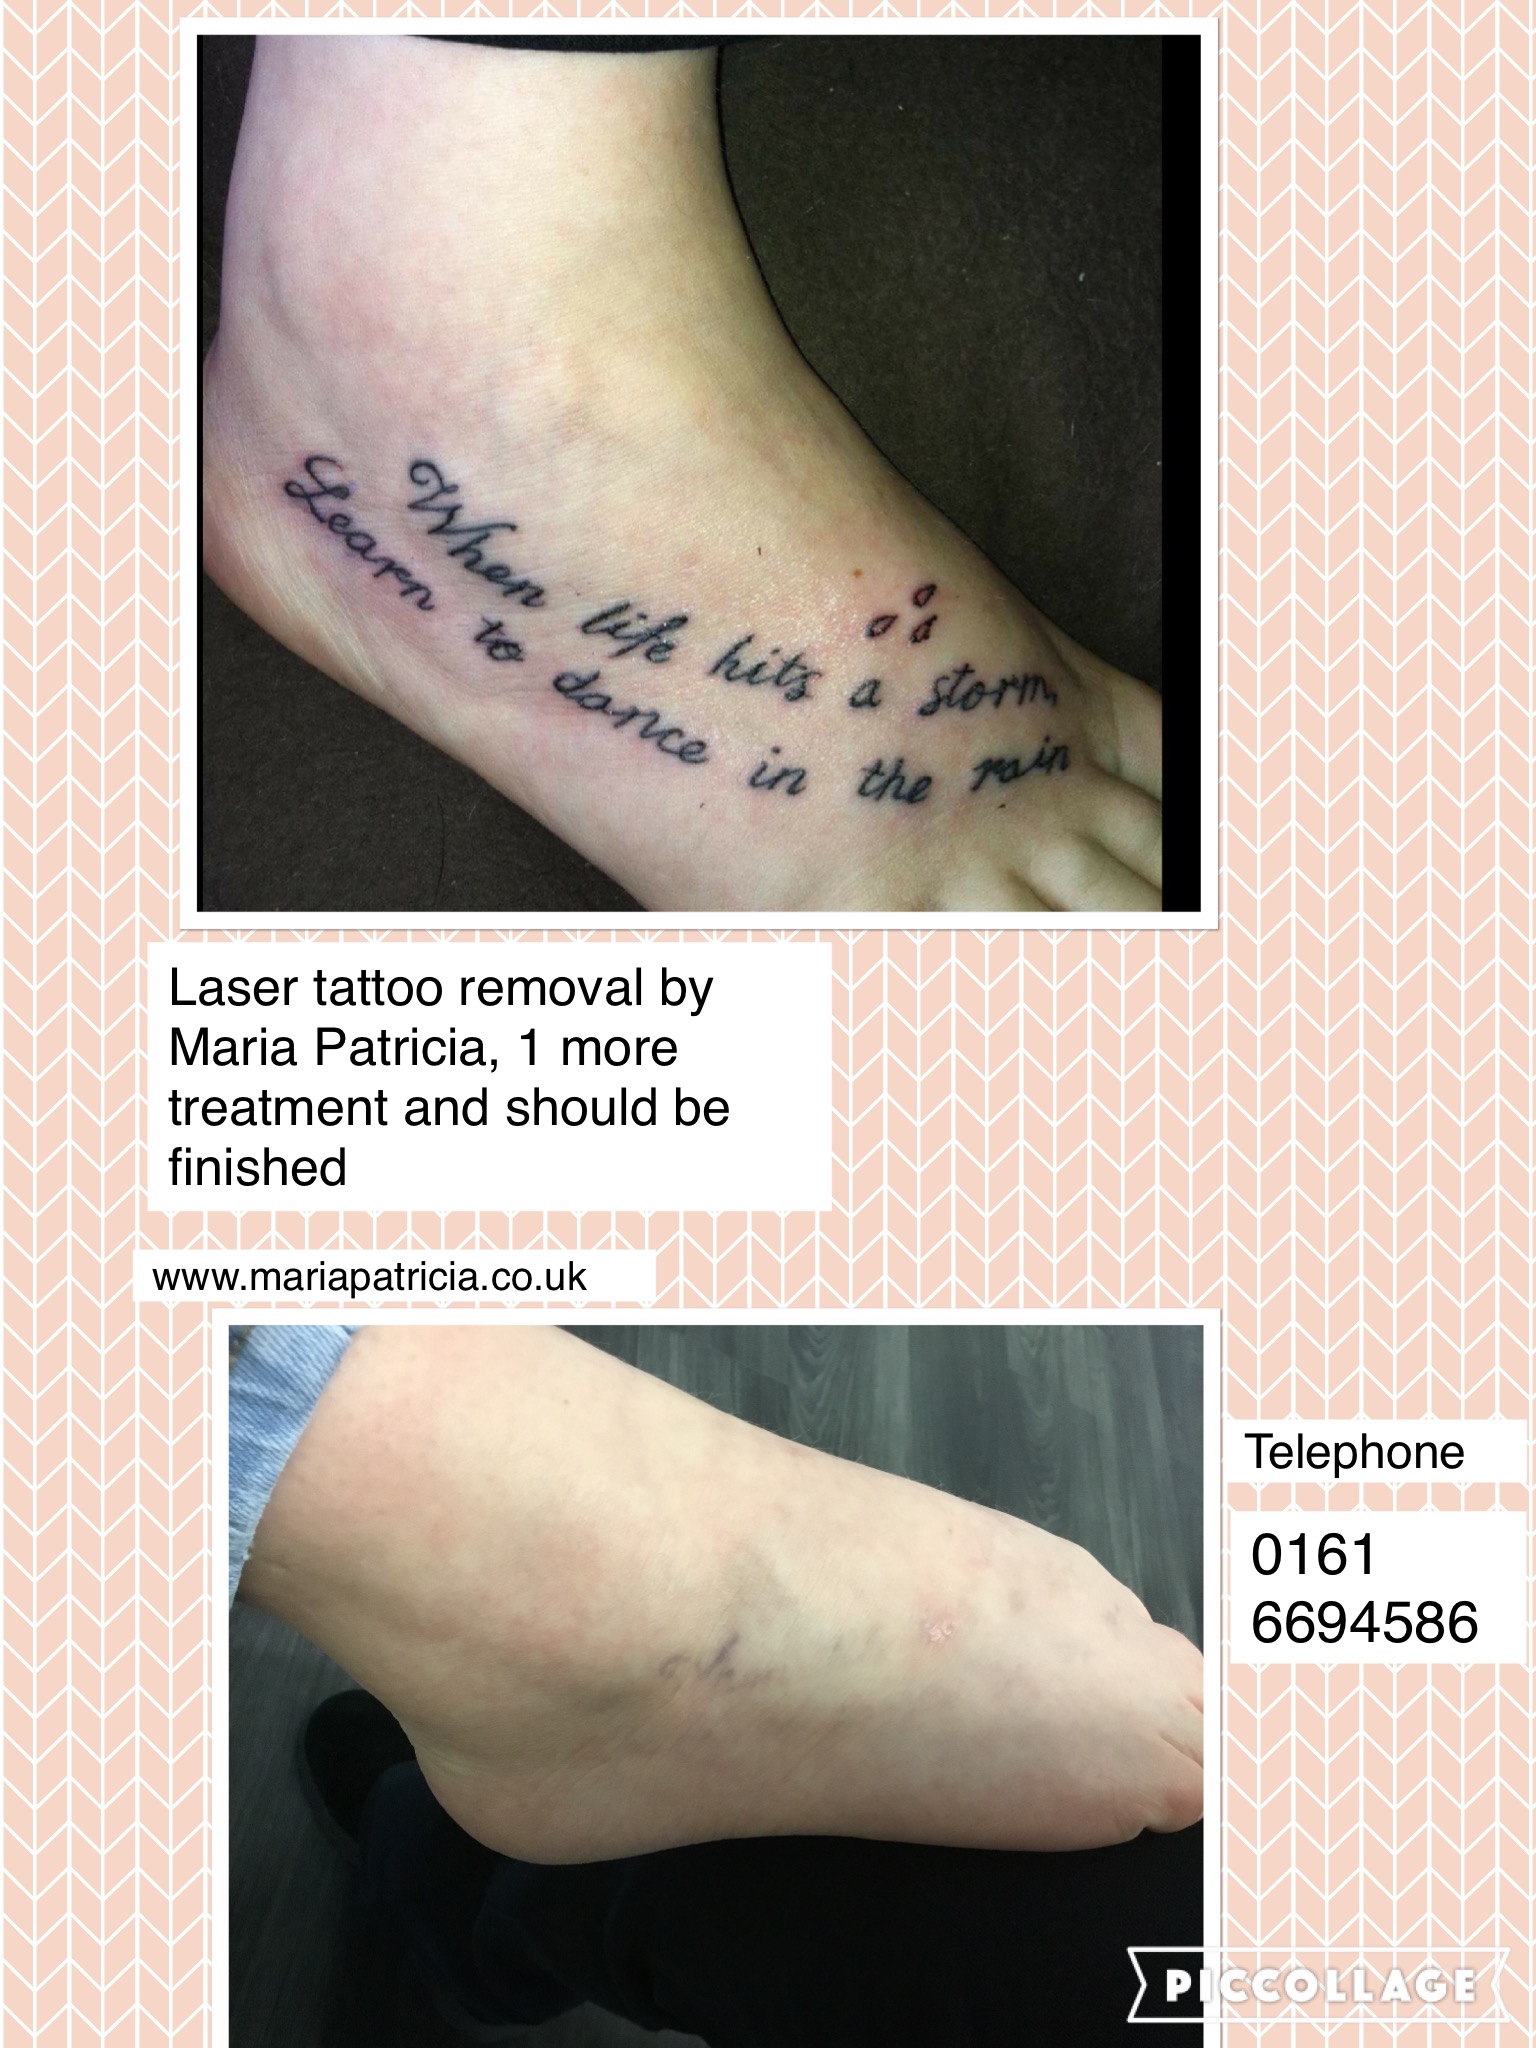 Latest before and after pictures of tattoo removal - Maria Patricia - Laser  Tattoo Removal - Laser Hair Removal - Carbon Laser - Skin Rejuvenation -  Dermal Rollers